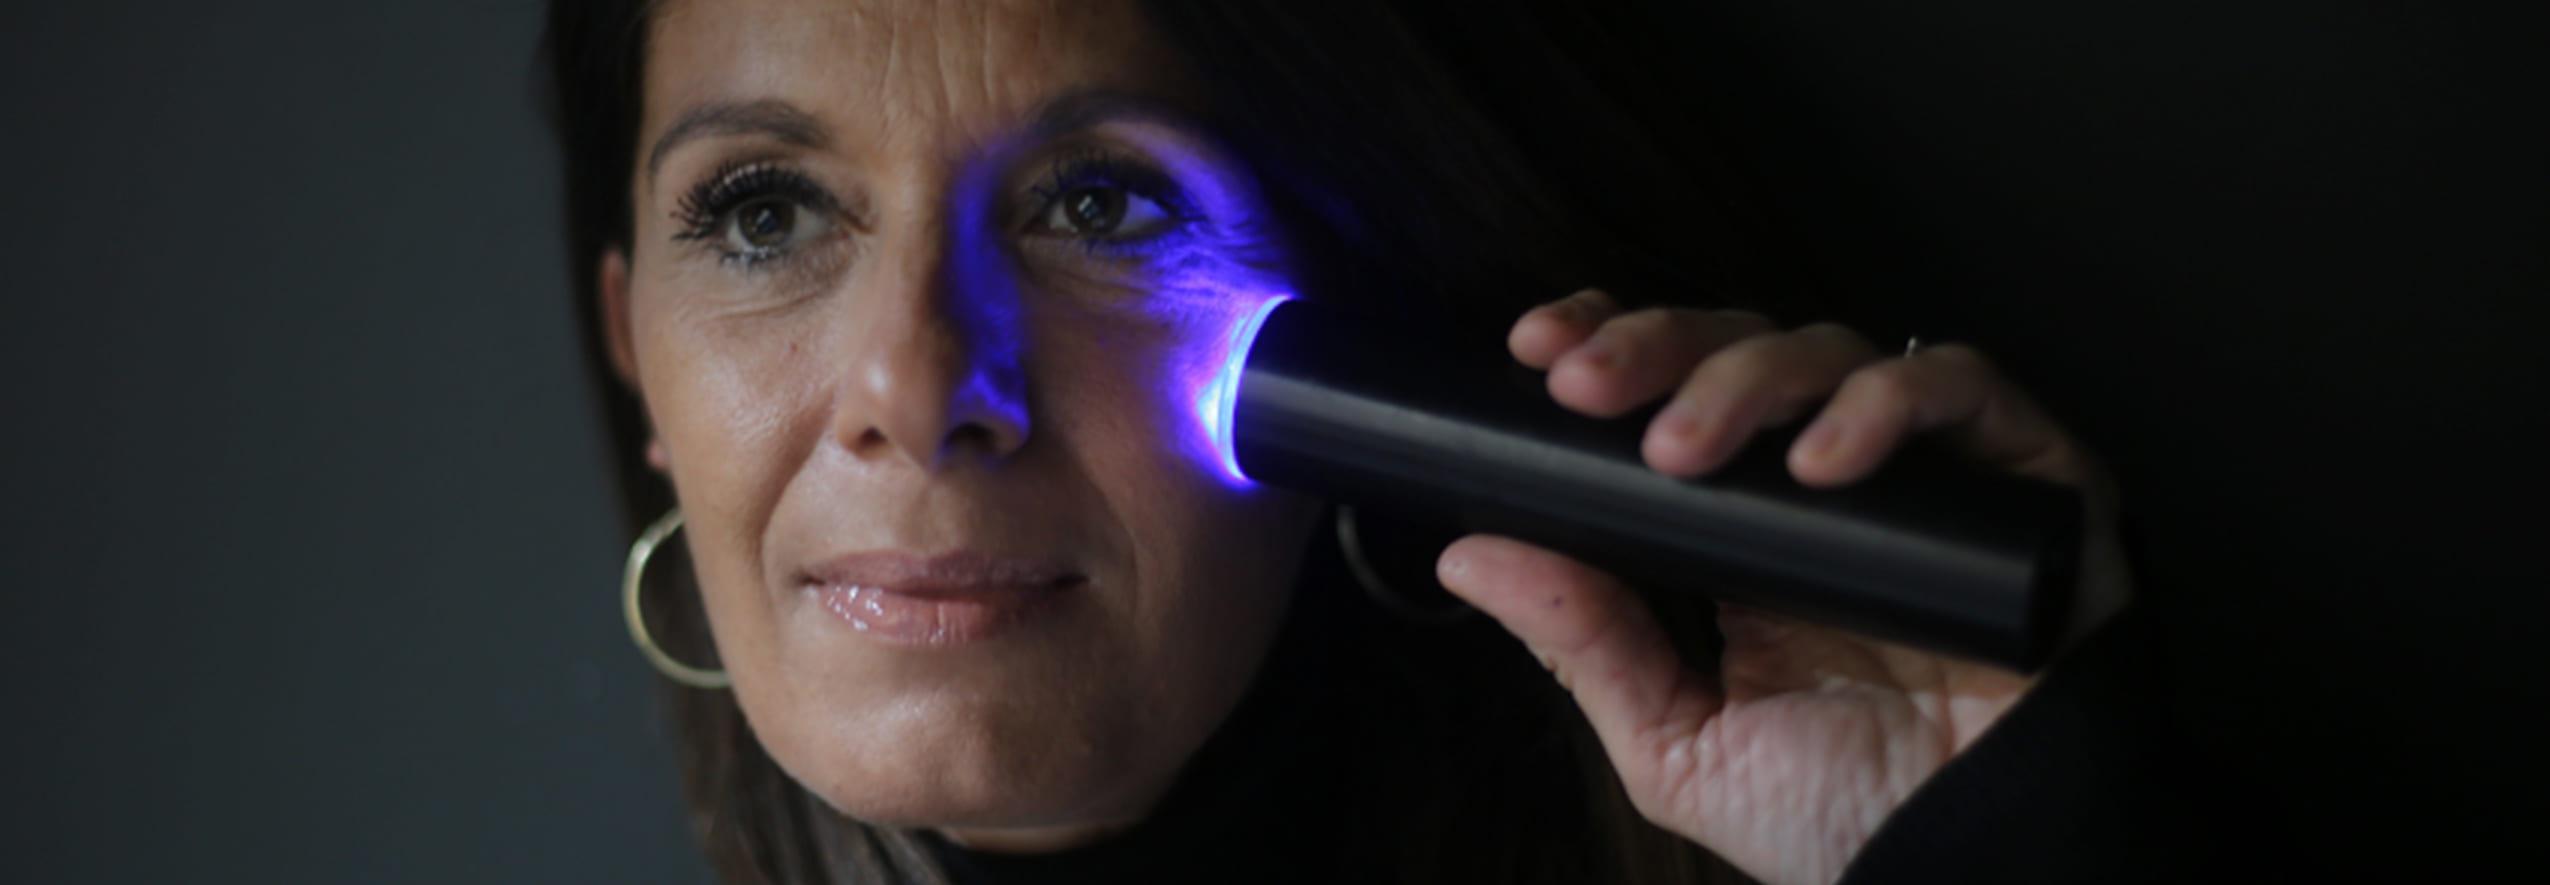 Woman uses laser